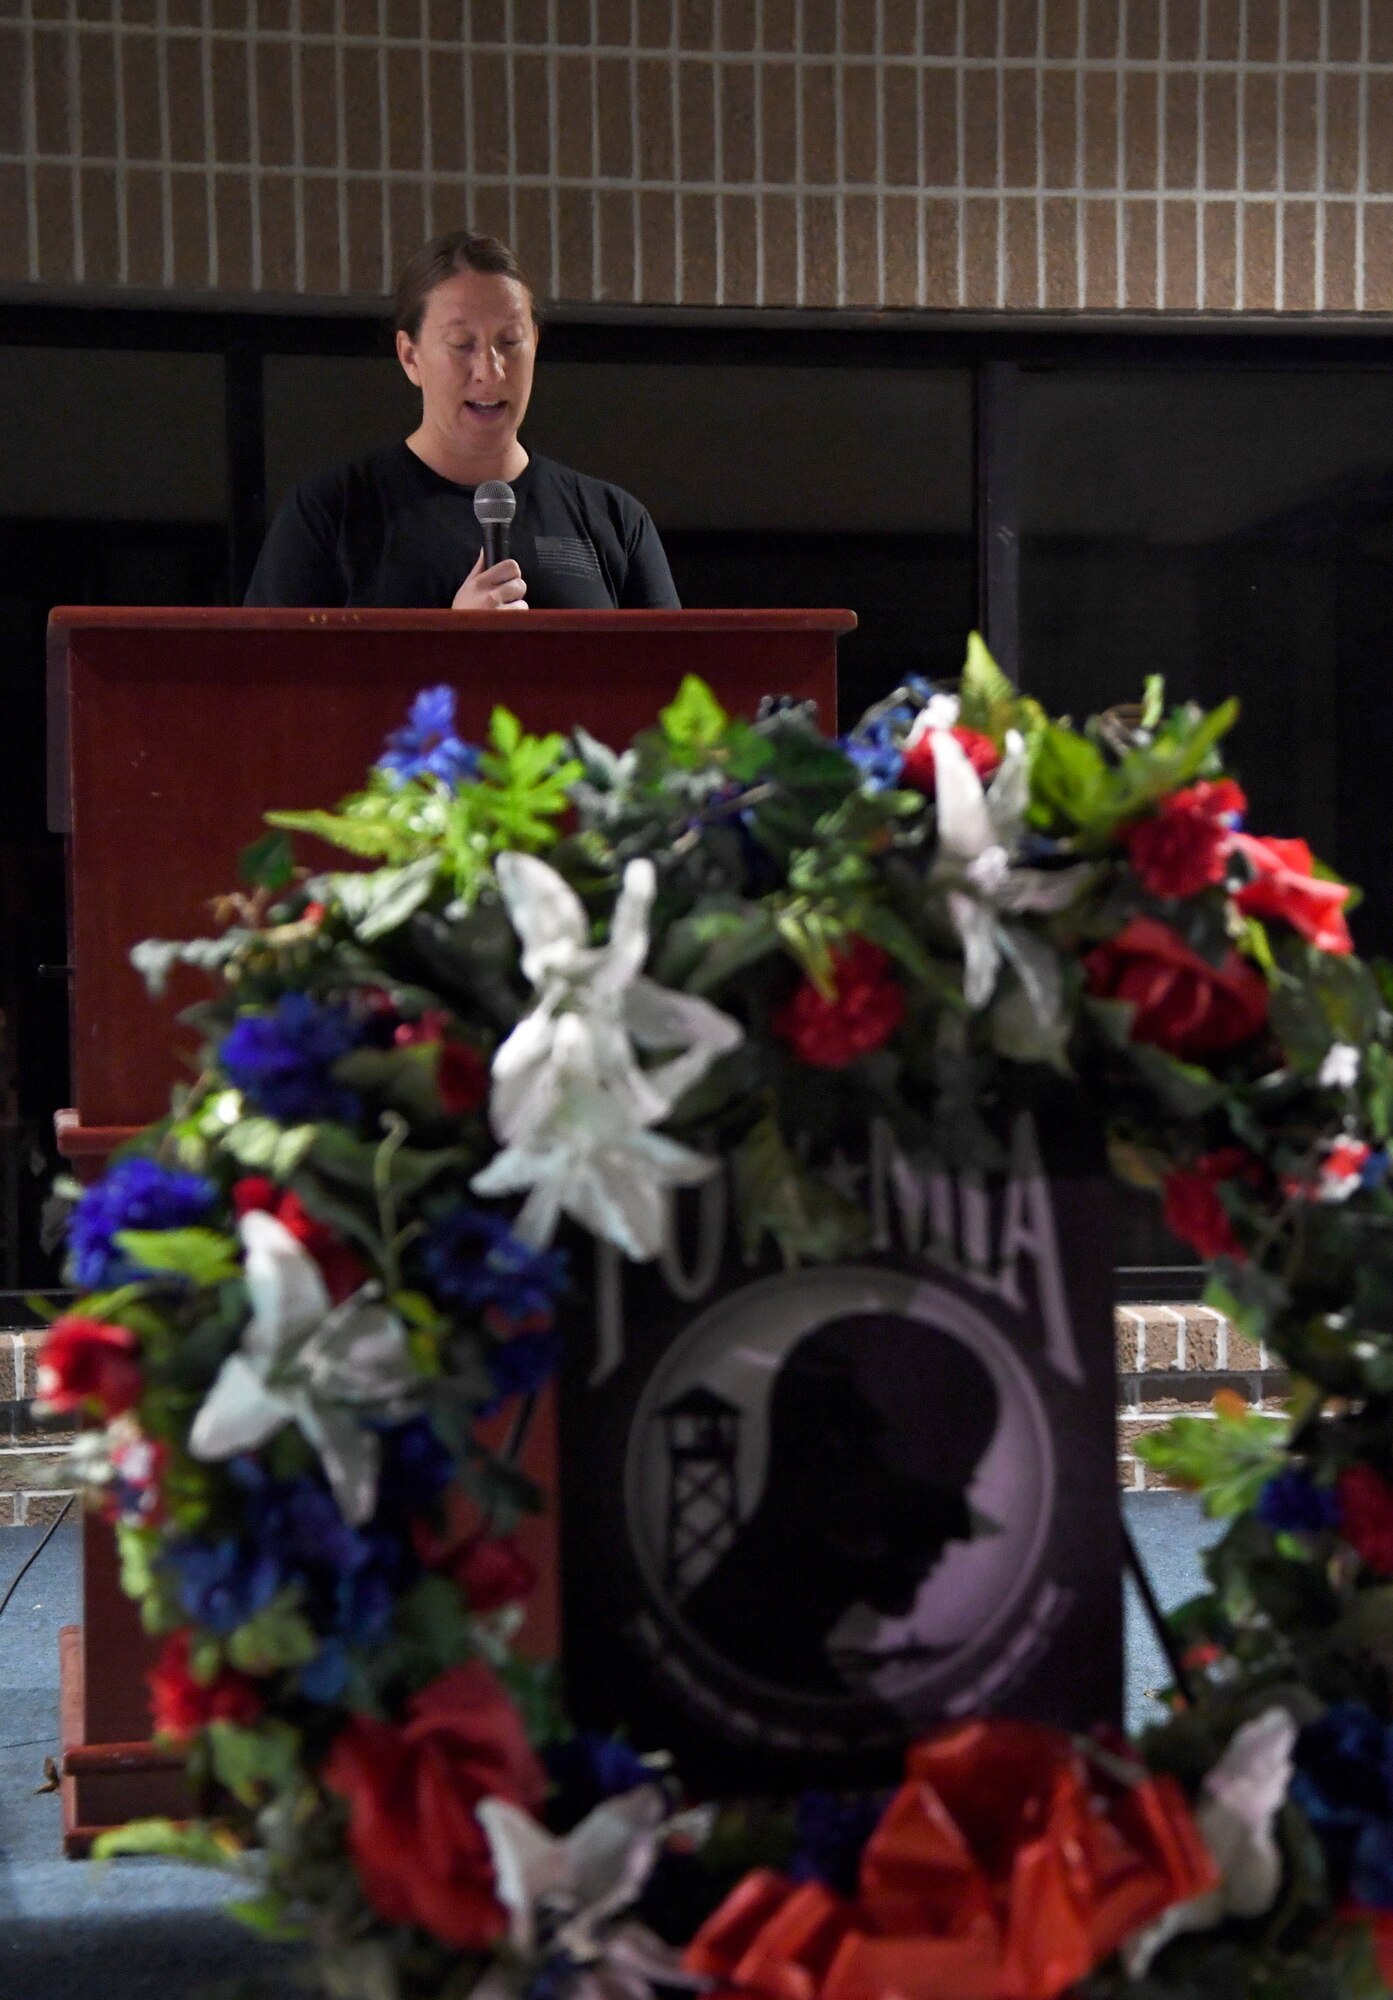 U.S. Air Force Lt. Col. Jill Heliker, 81st Training Group deputy commander, delivers remarks during the POW/MIA run and vigil opening ceremonies at Keesler Air Force Base, Mississippi, Oct. 1, 2021. This event, hosted by the Air Force Sergeants Association Chapter 652, is held annually to raise awareness and pay tribute to all prisoners of war and the military members still missing in action. (U.S. Air Force photo by Kemberly Groue)